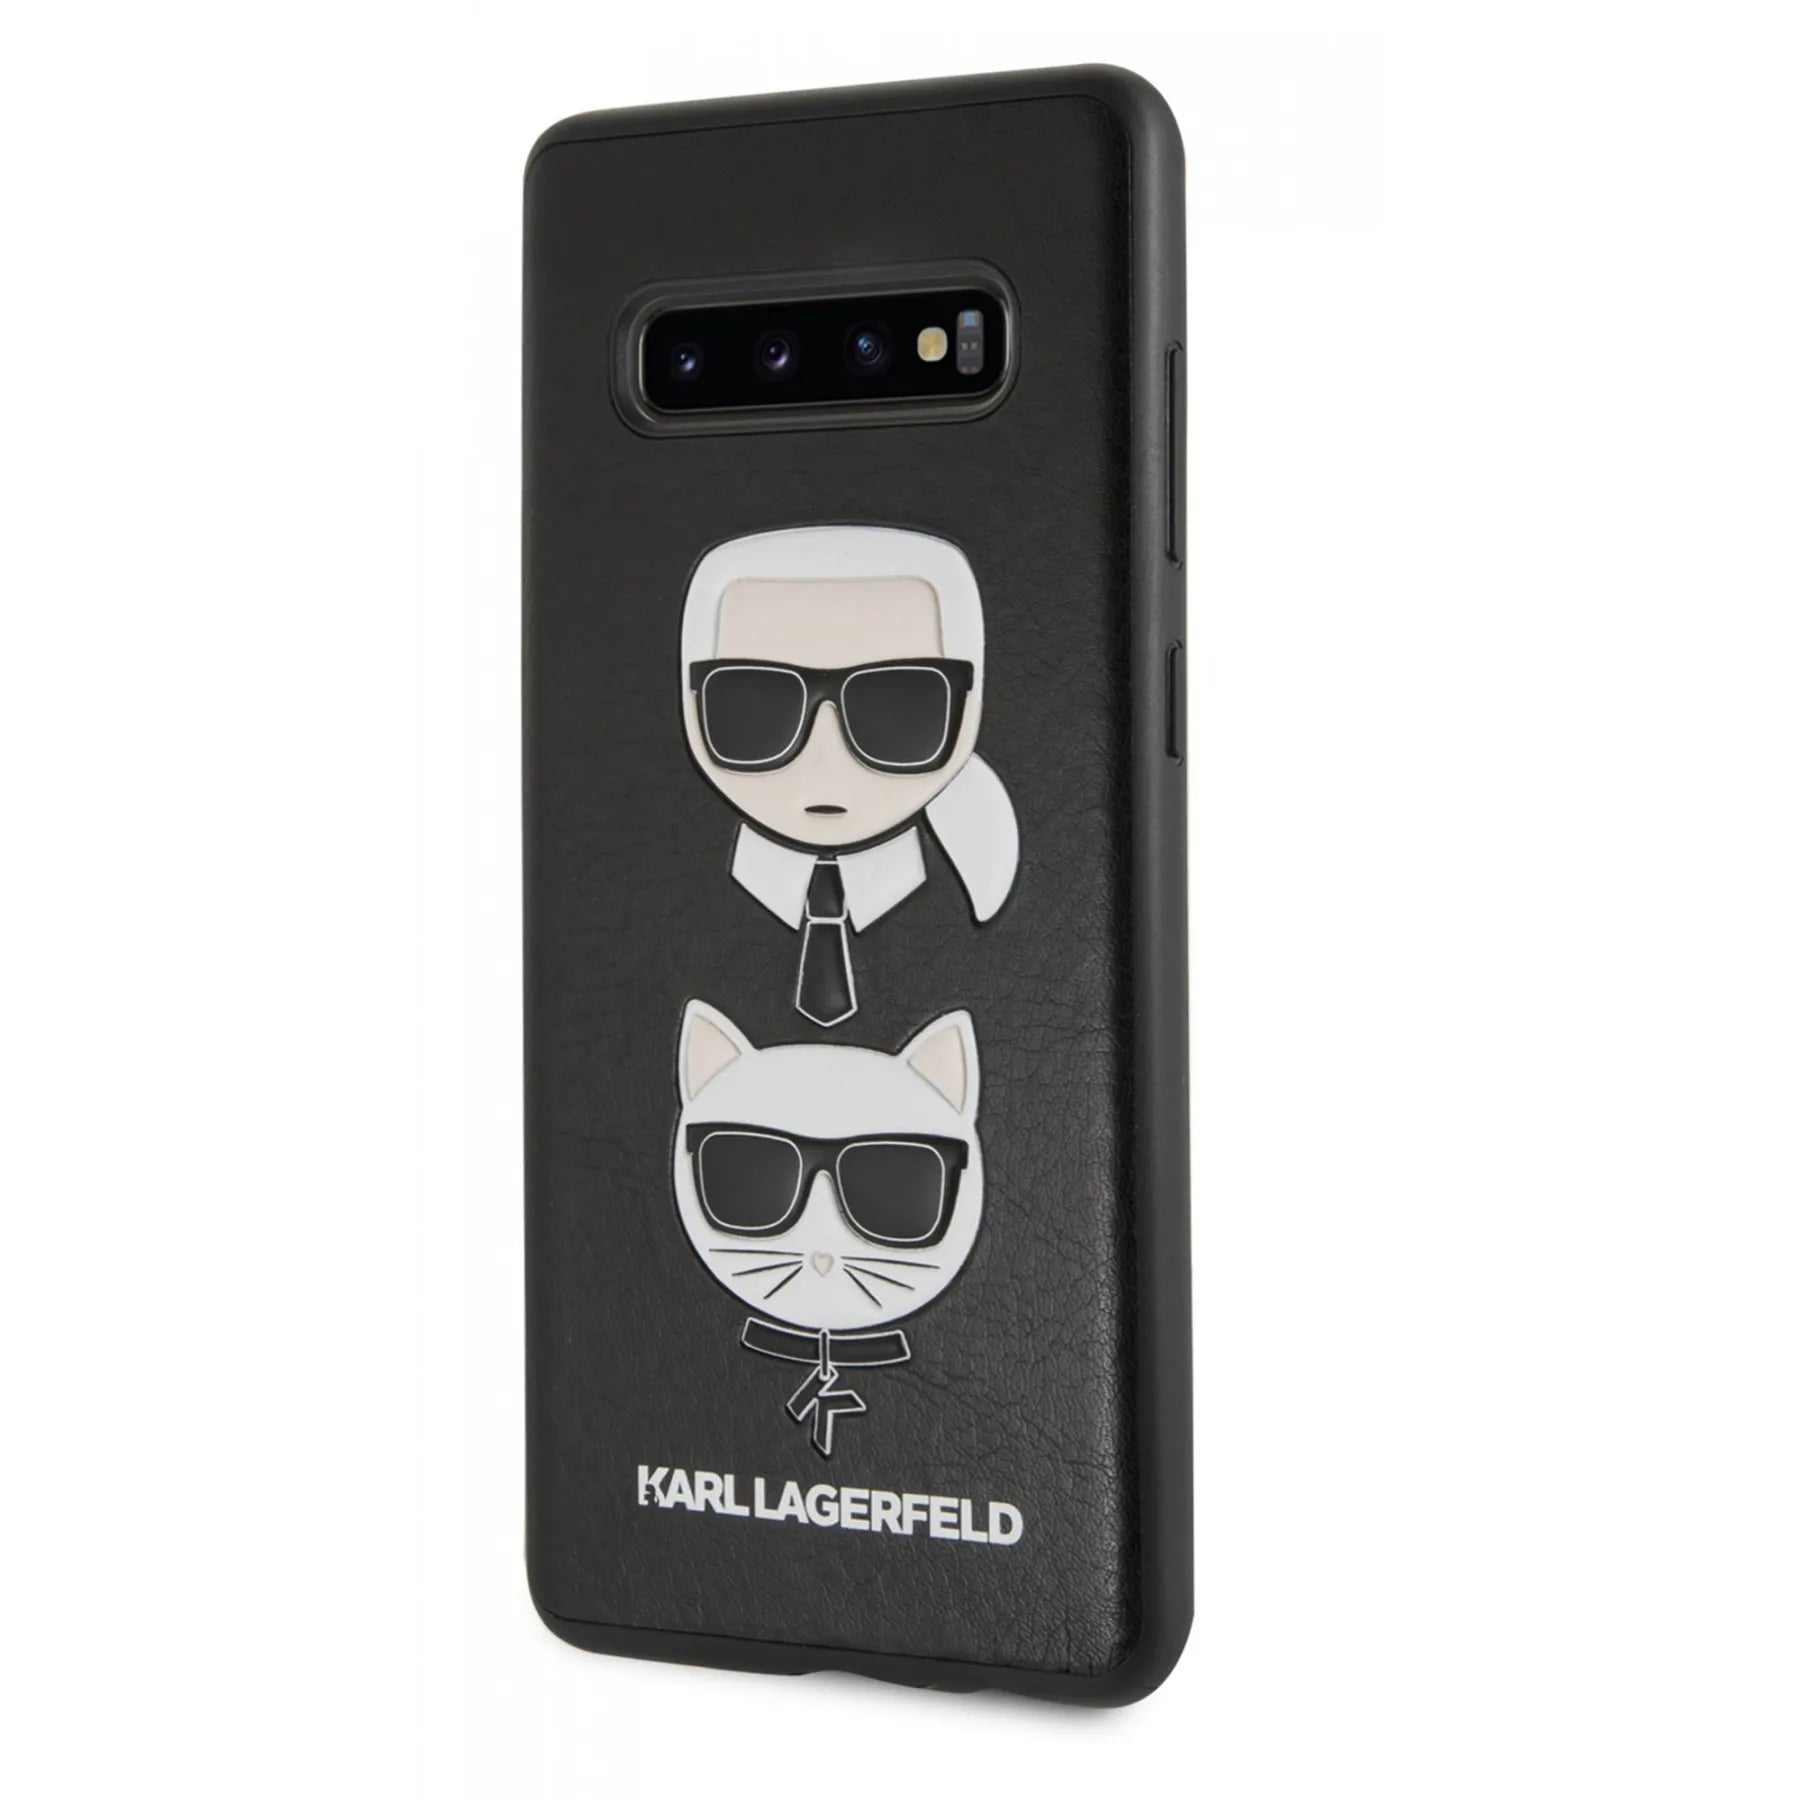 Coque Karl Lagerfeld pour Samsung S10 Plus - My Store